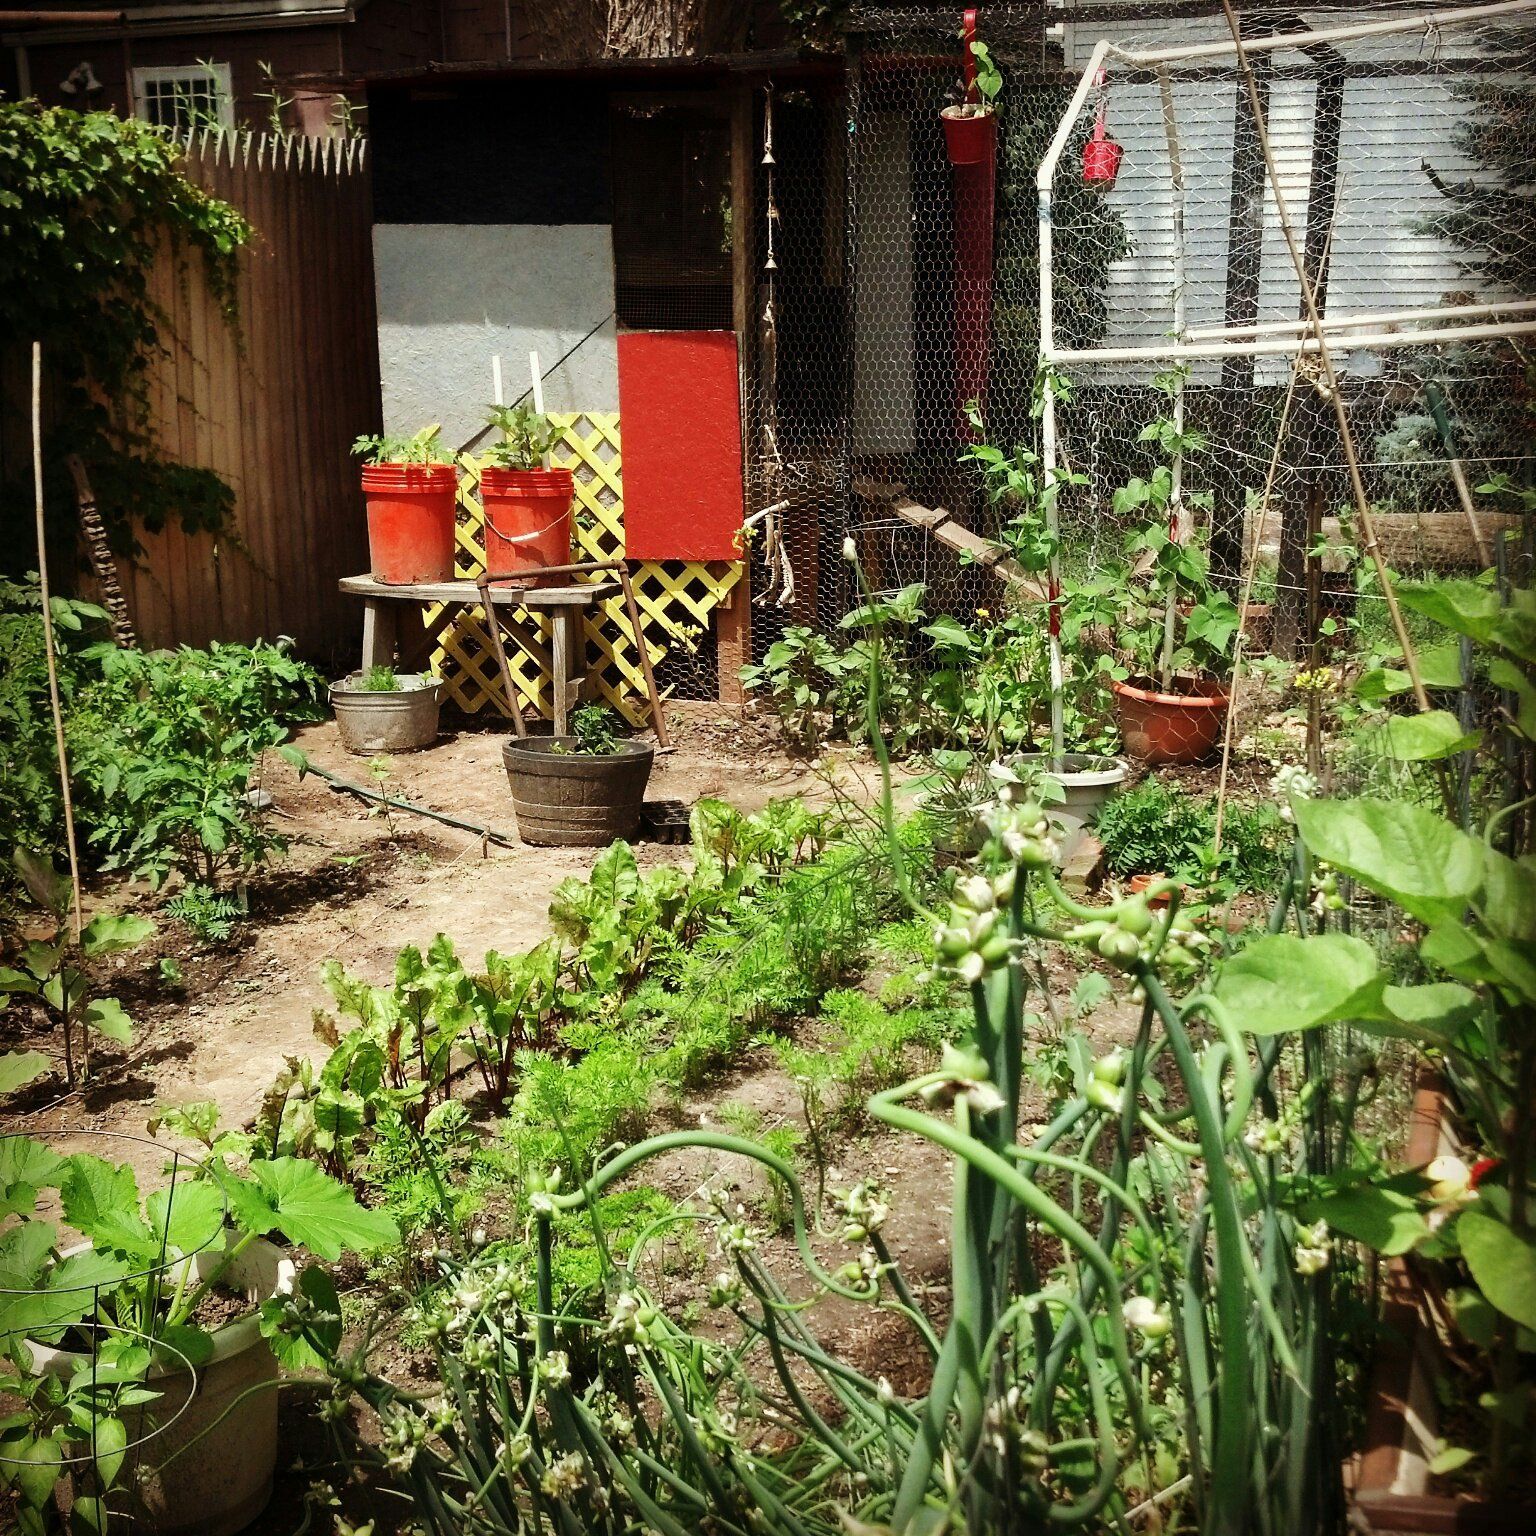 The garden and the coop